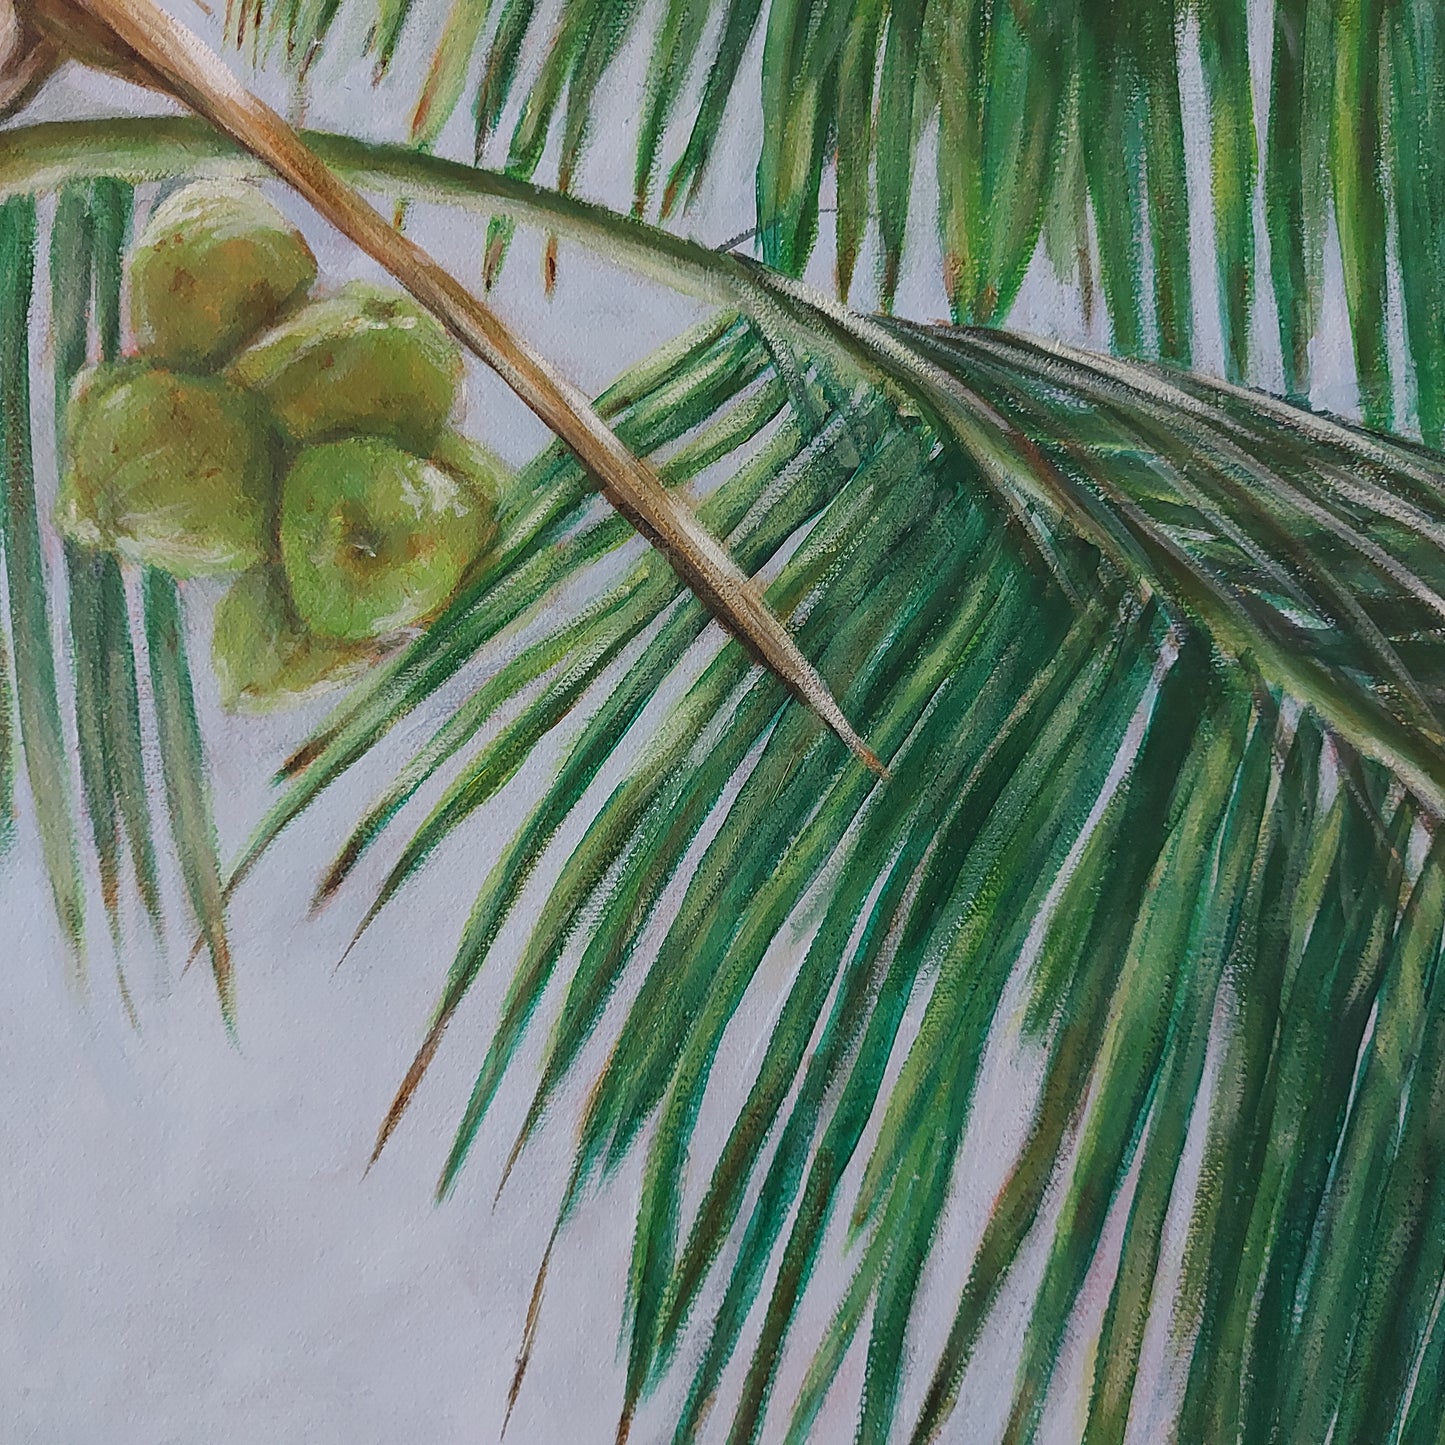 Coconuts & Palms is a close up painting of a coconut palm tree on a warm summer day as the sun peaks through the clouds and shines brightly on some of the leaves. The painting is 24 x 30" oil on canvas by Katherine Polack